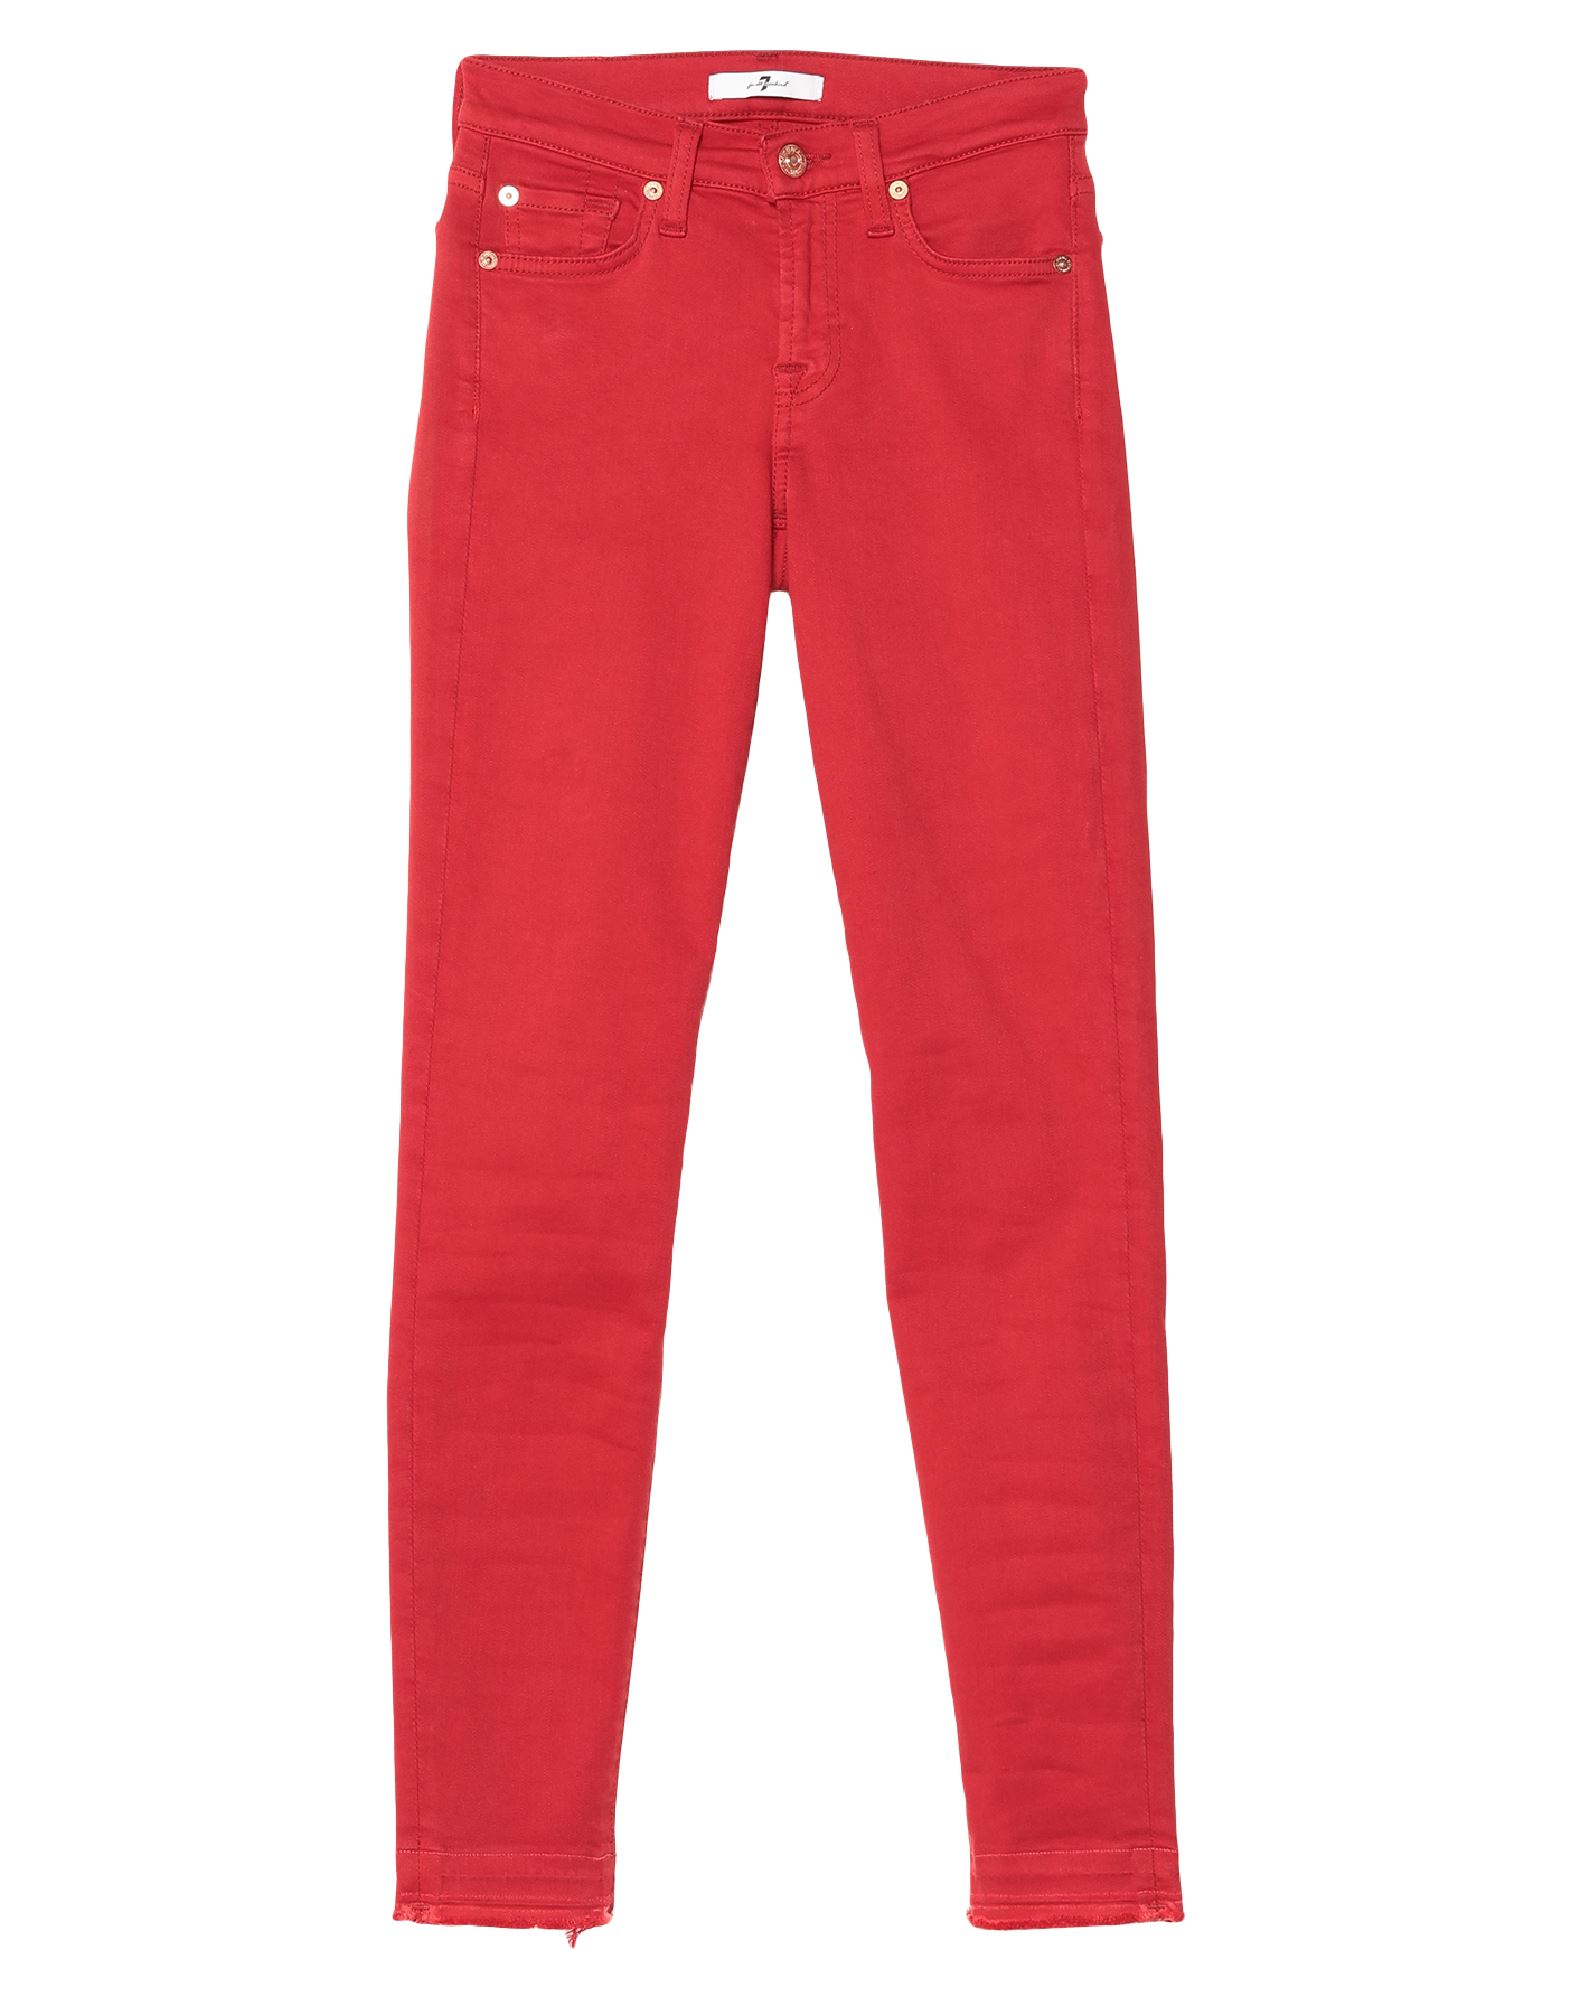 7 FOR ALL MANKIND Hose Damen Rot von 7 FOR ALL MANKIND